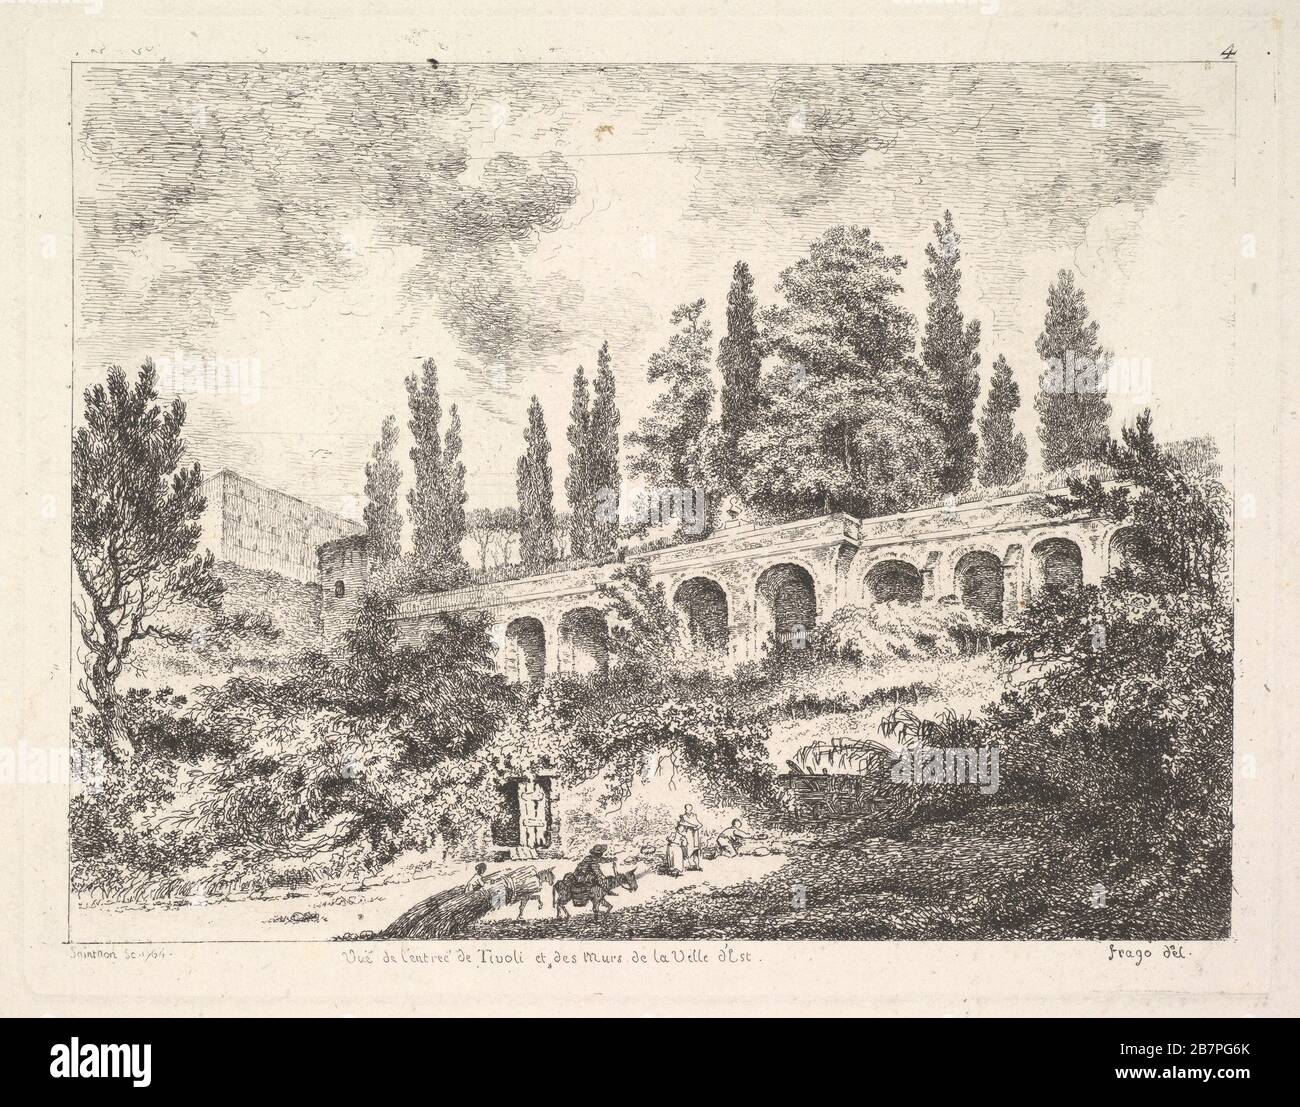 View of the entrance to Tivoli and the walls of the Villa d'Este, horsemen approaching the entrance at bottom center, arched entrance in the middleground, cyrus trees and other plants surrounding, 18th century. After Jean Honor&#xe9; Fragonard Stock Photo